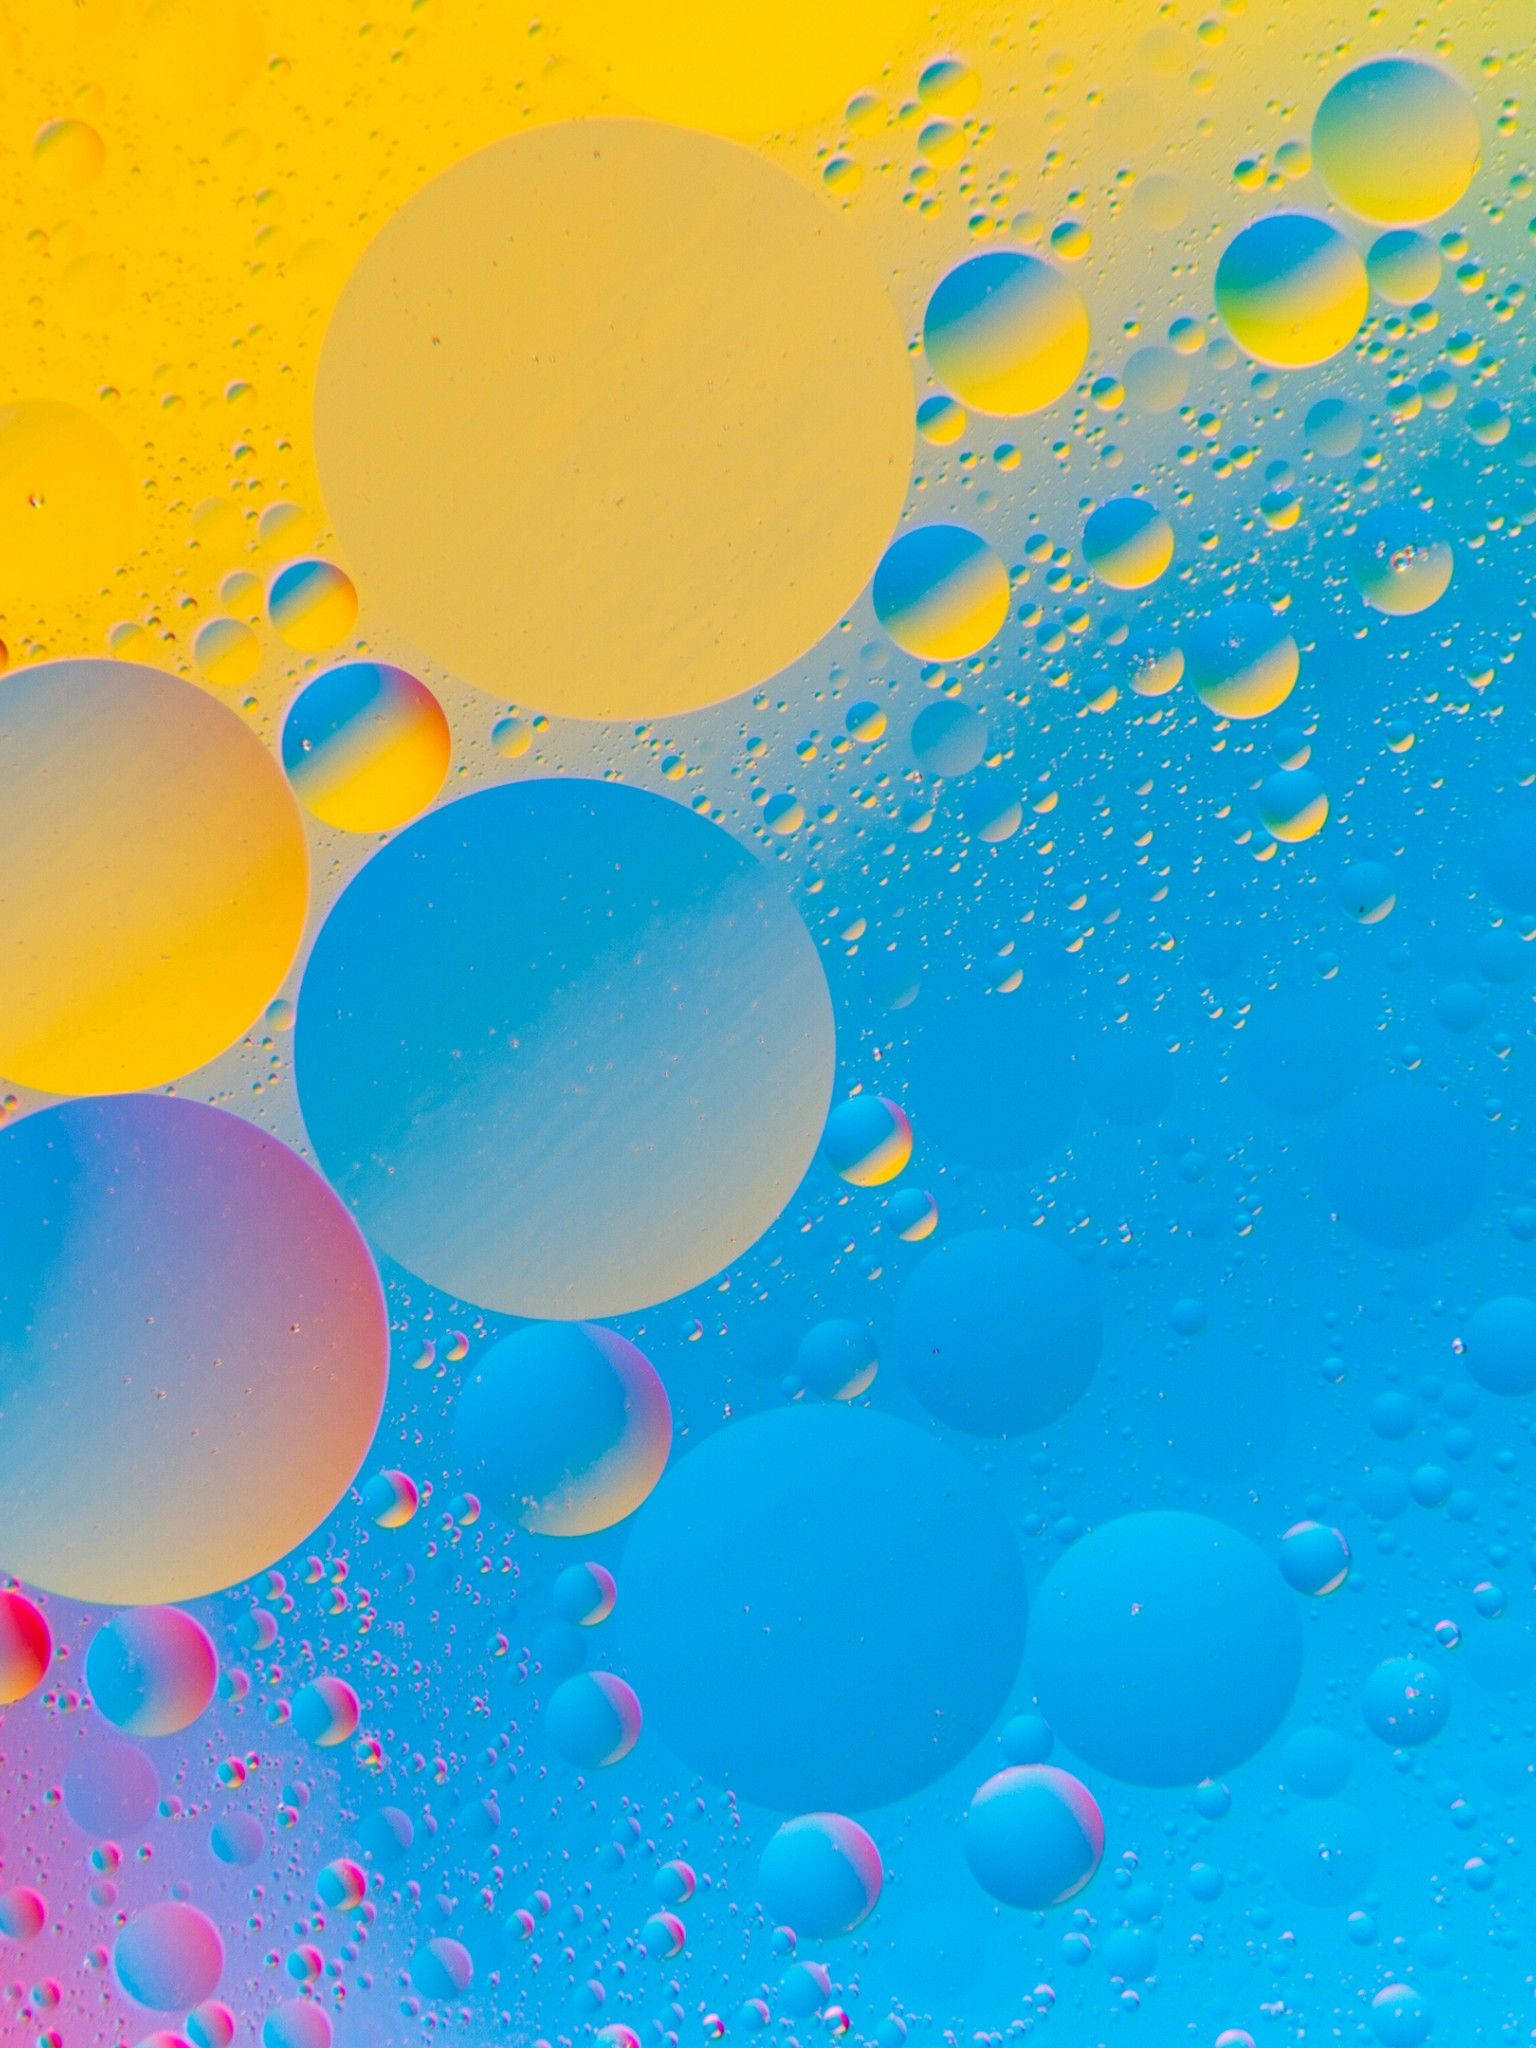 Colored Bubbles As Official Ipad Display Wallpaper